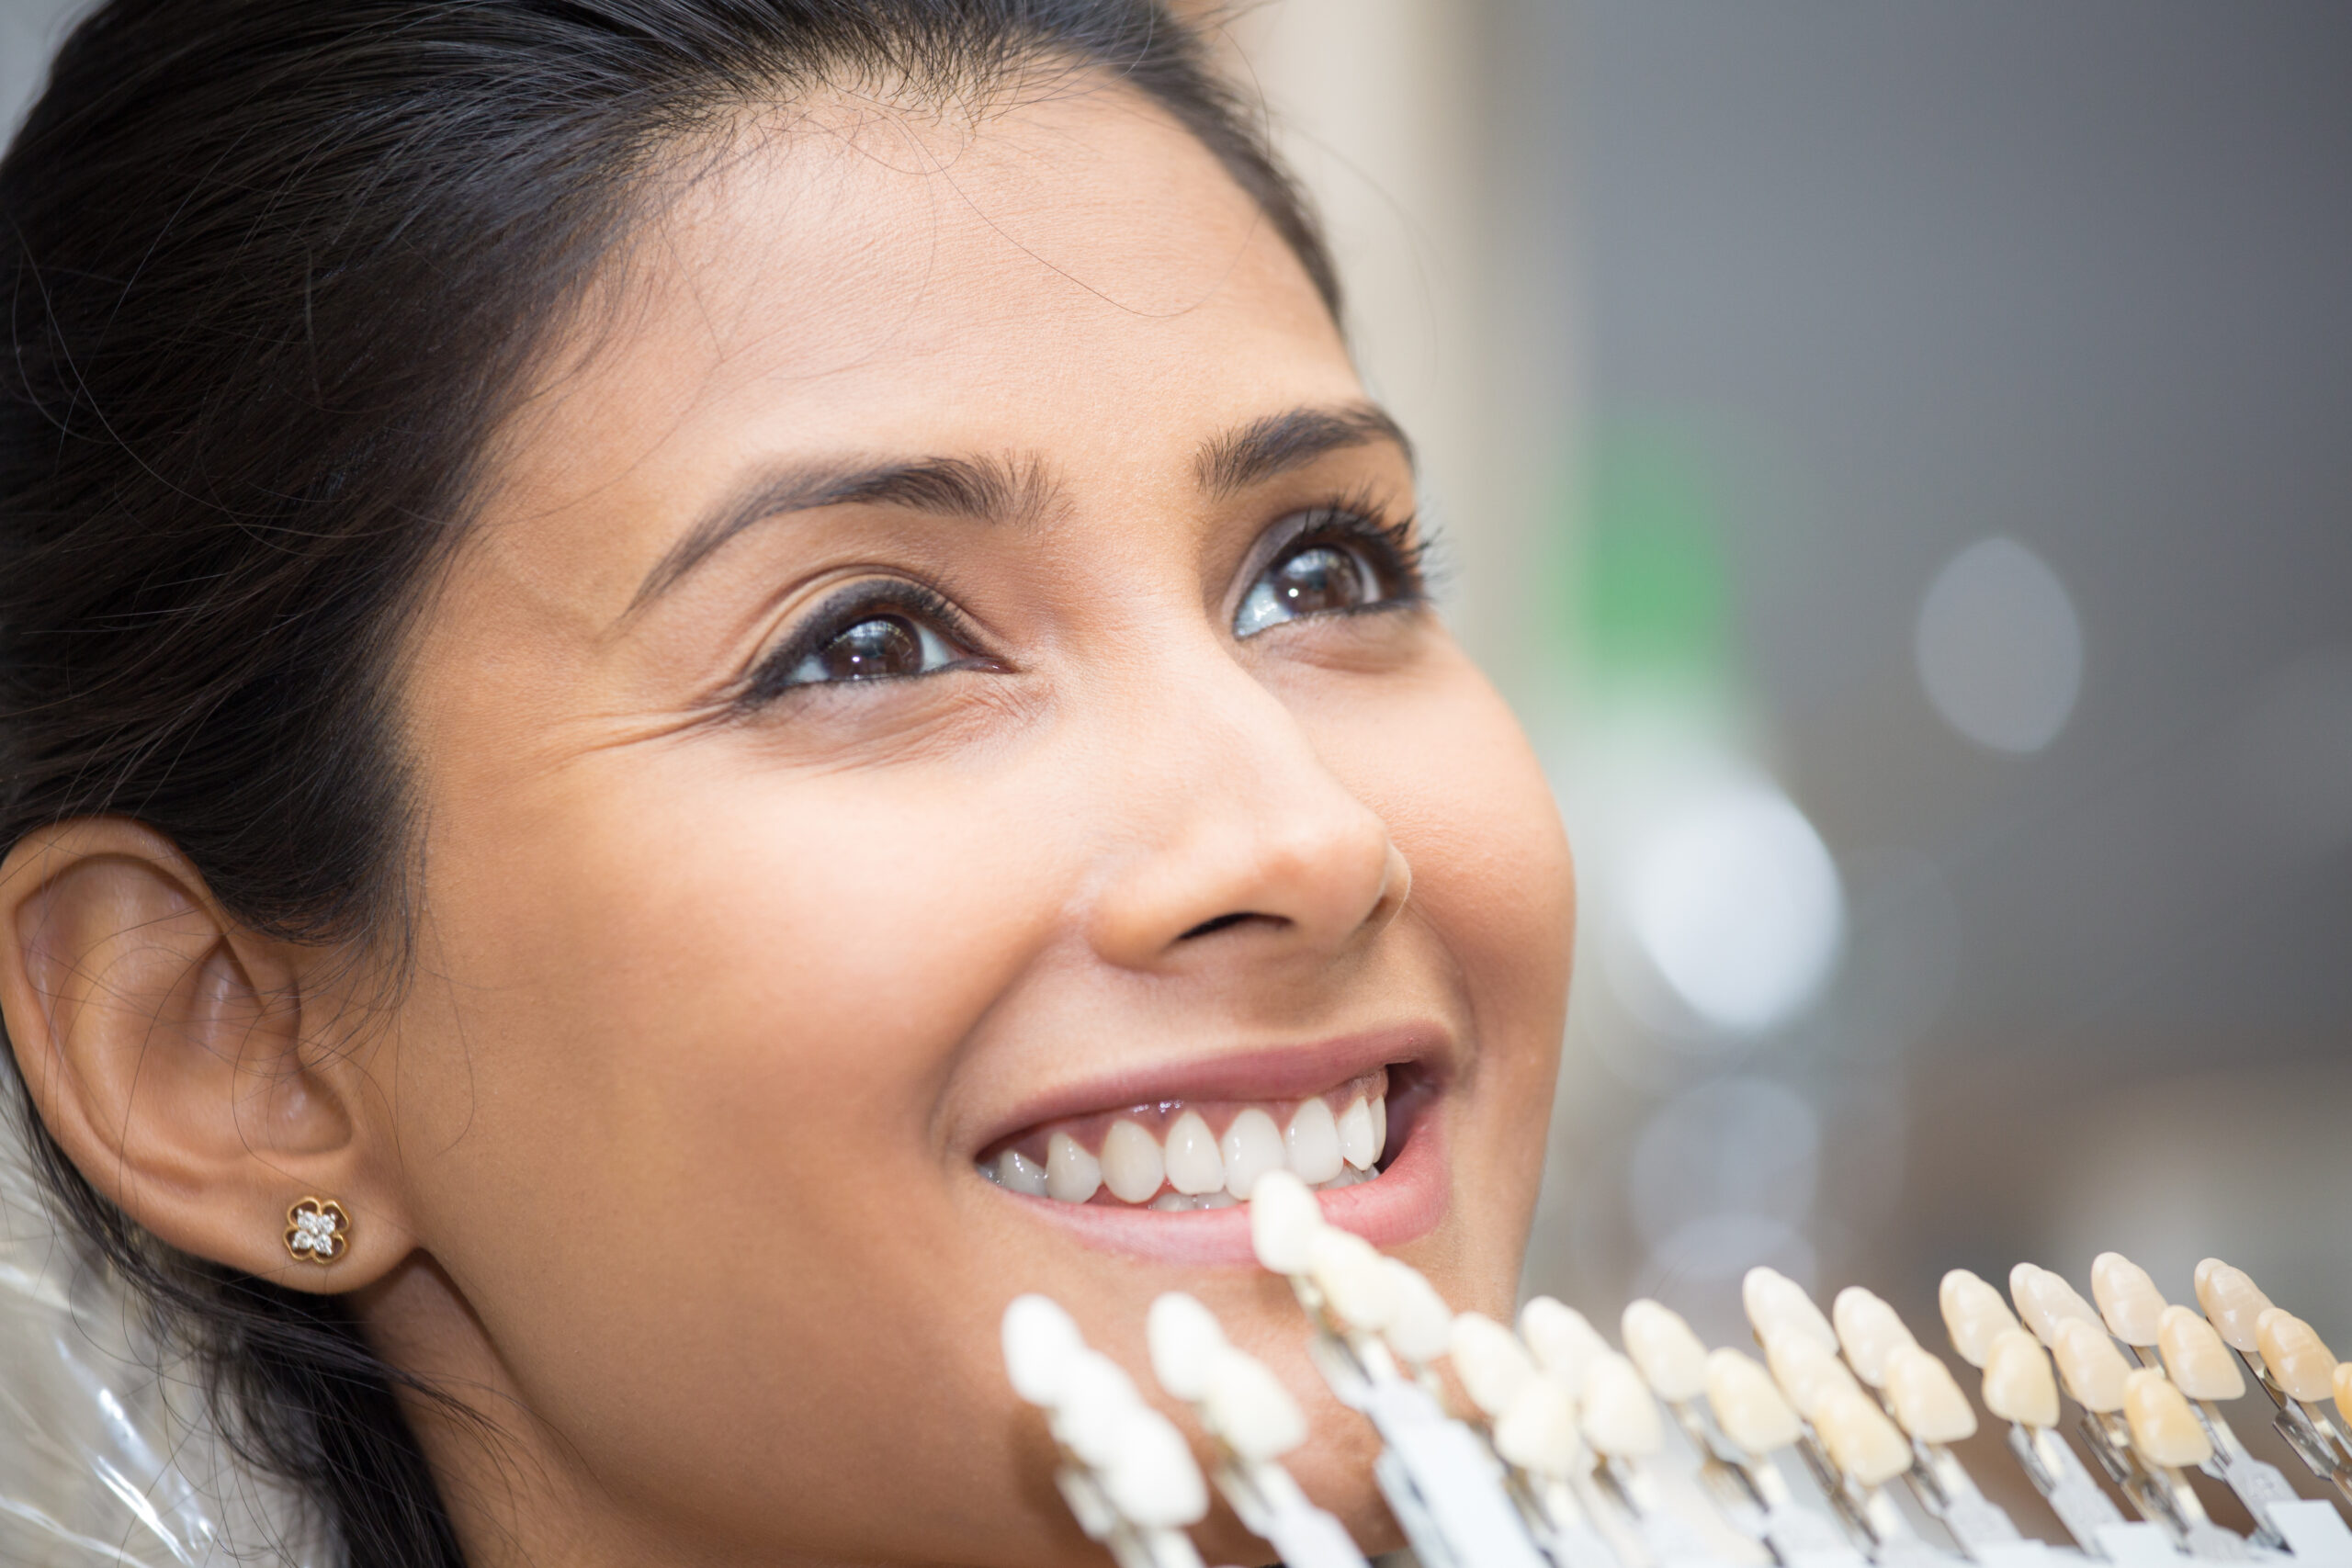 Closeup portrait of young woman getting shade of teeth selected by dental professional for treatment purposes